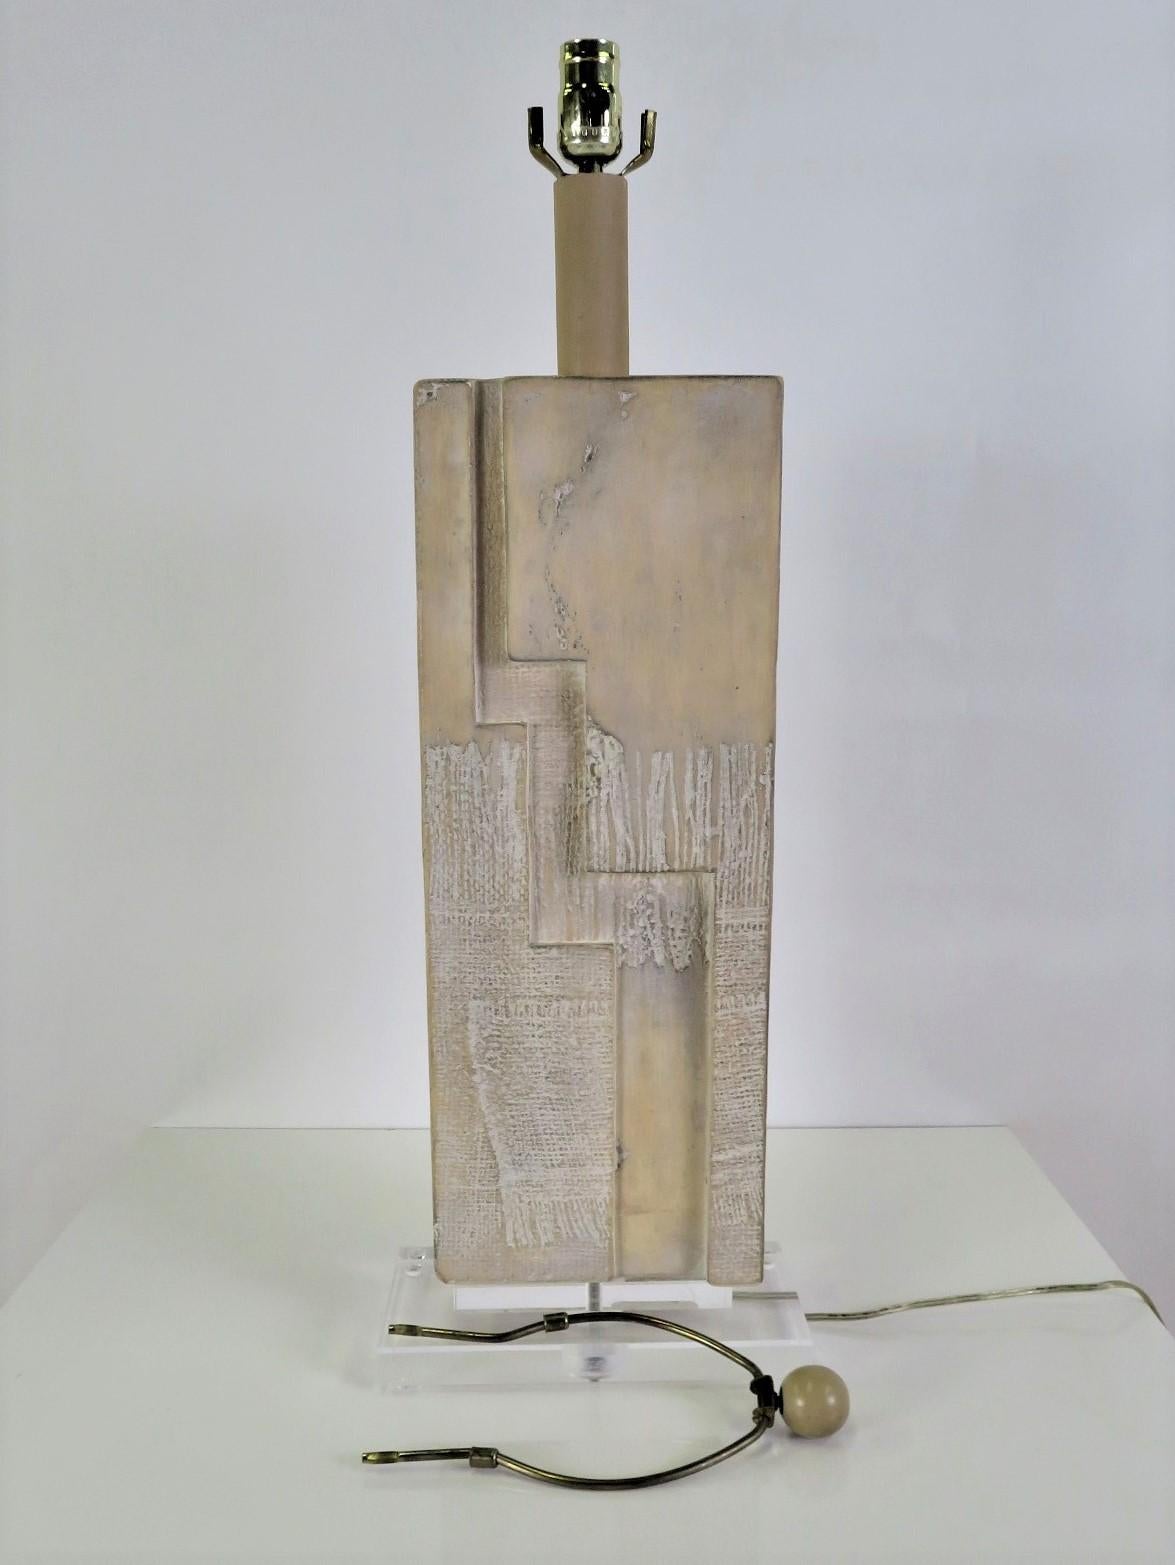 Raised on a lucite rectangular plinth base, this 1980s Lamp has a Brutalist Shaped stacked Stone Slab Form center.  Made by Casual Lamps of California, incorporating their favorite look of whitewashed forms.  Original wiring and new three level UL